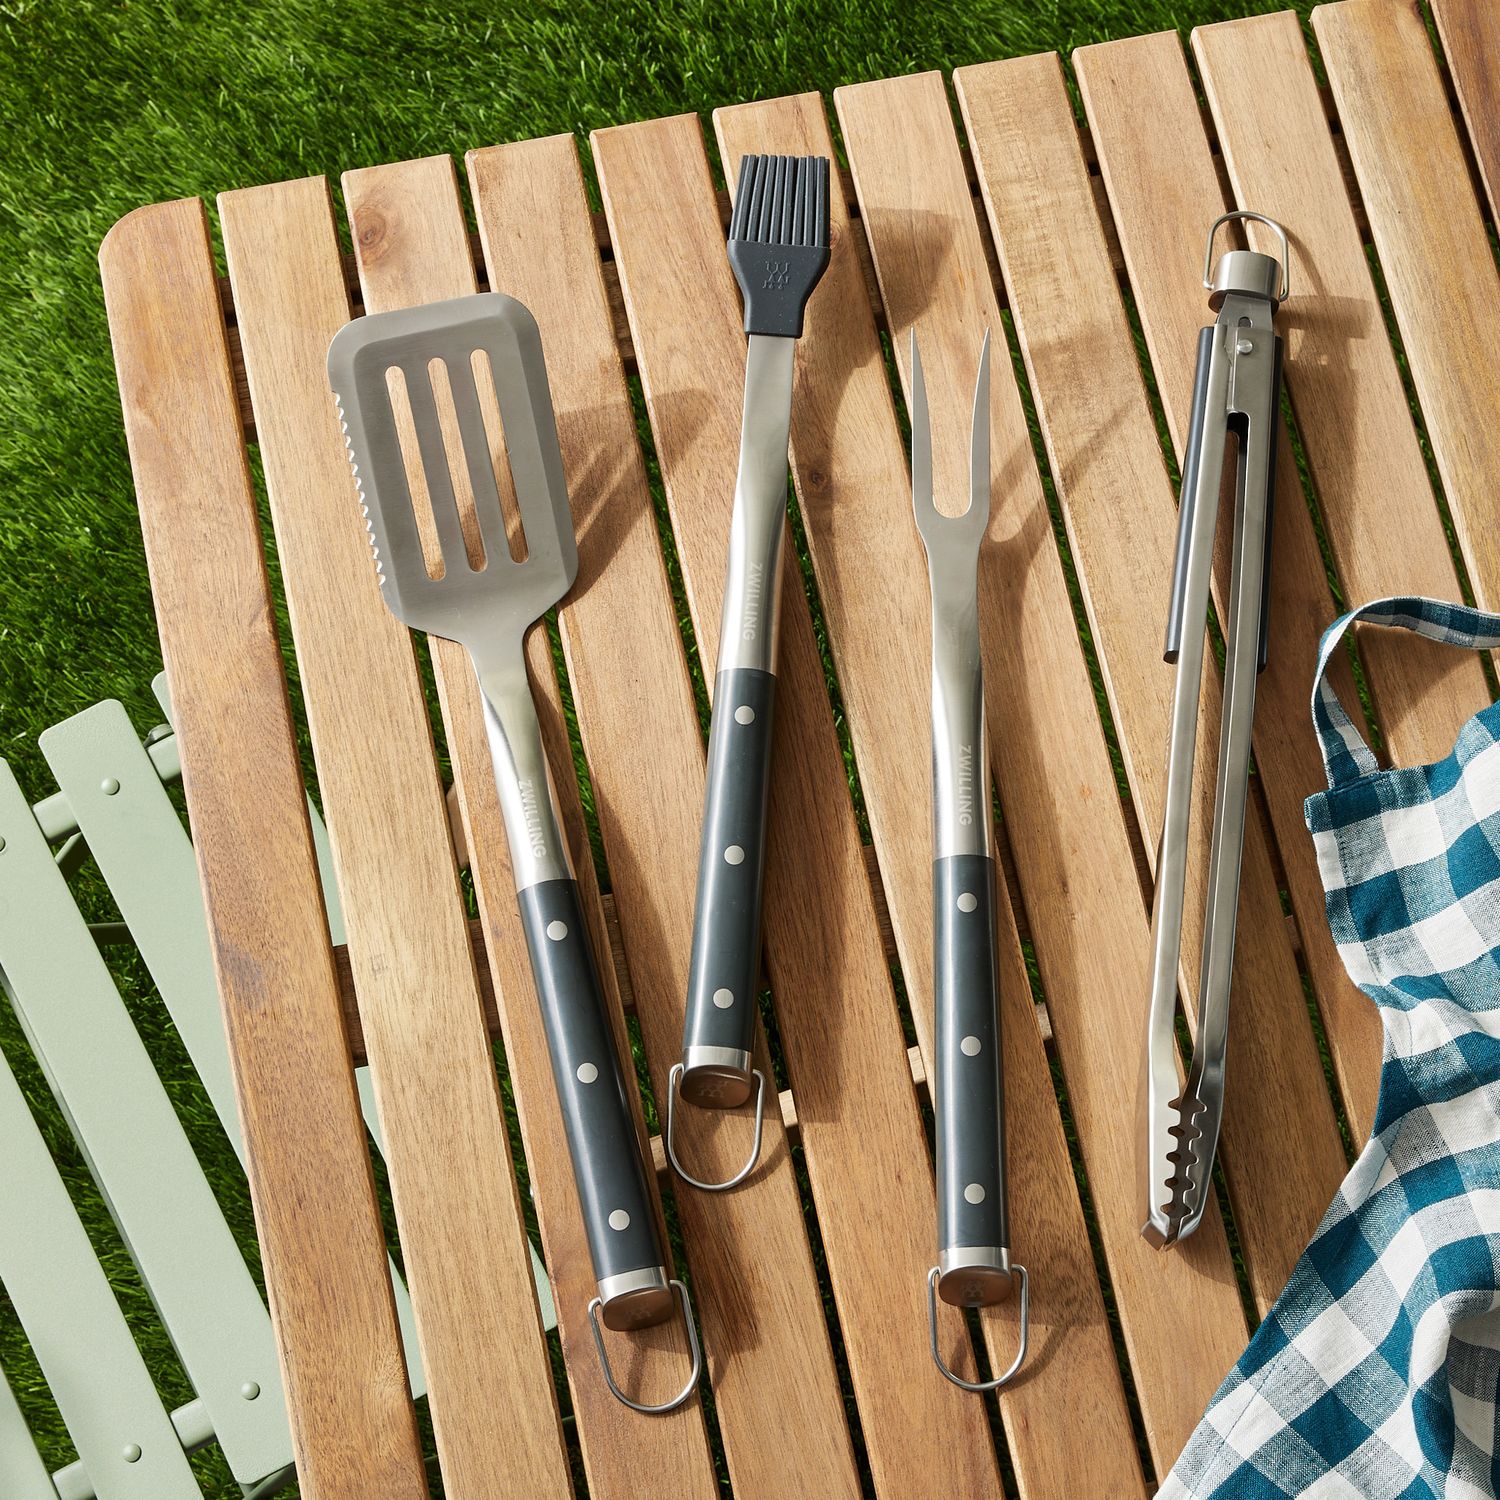 Zwilling Stainless-Steel Grilling Tools, Single or 5-Piece Set on